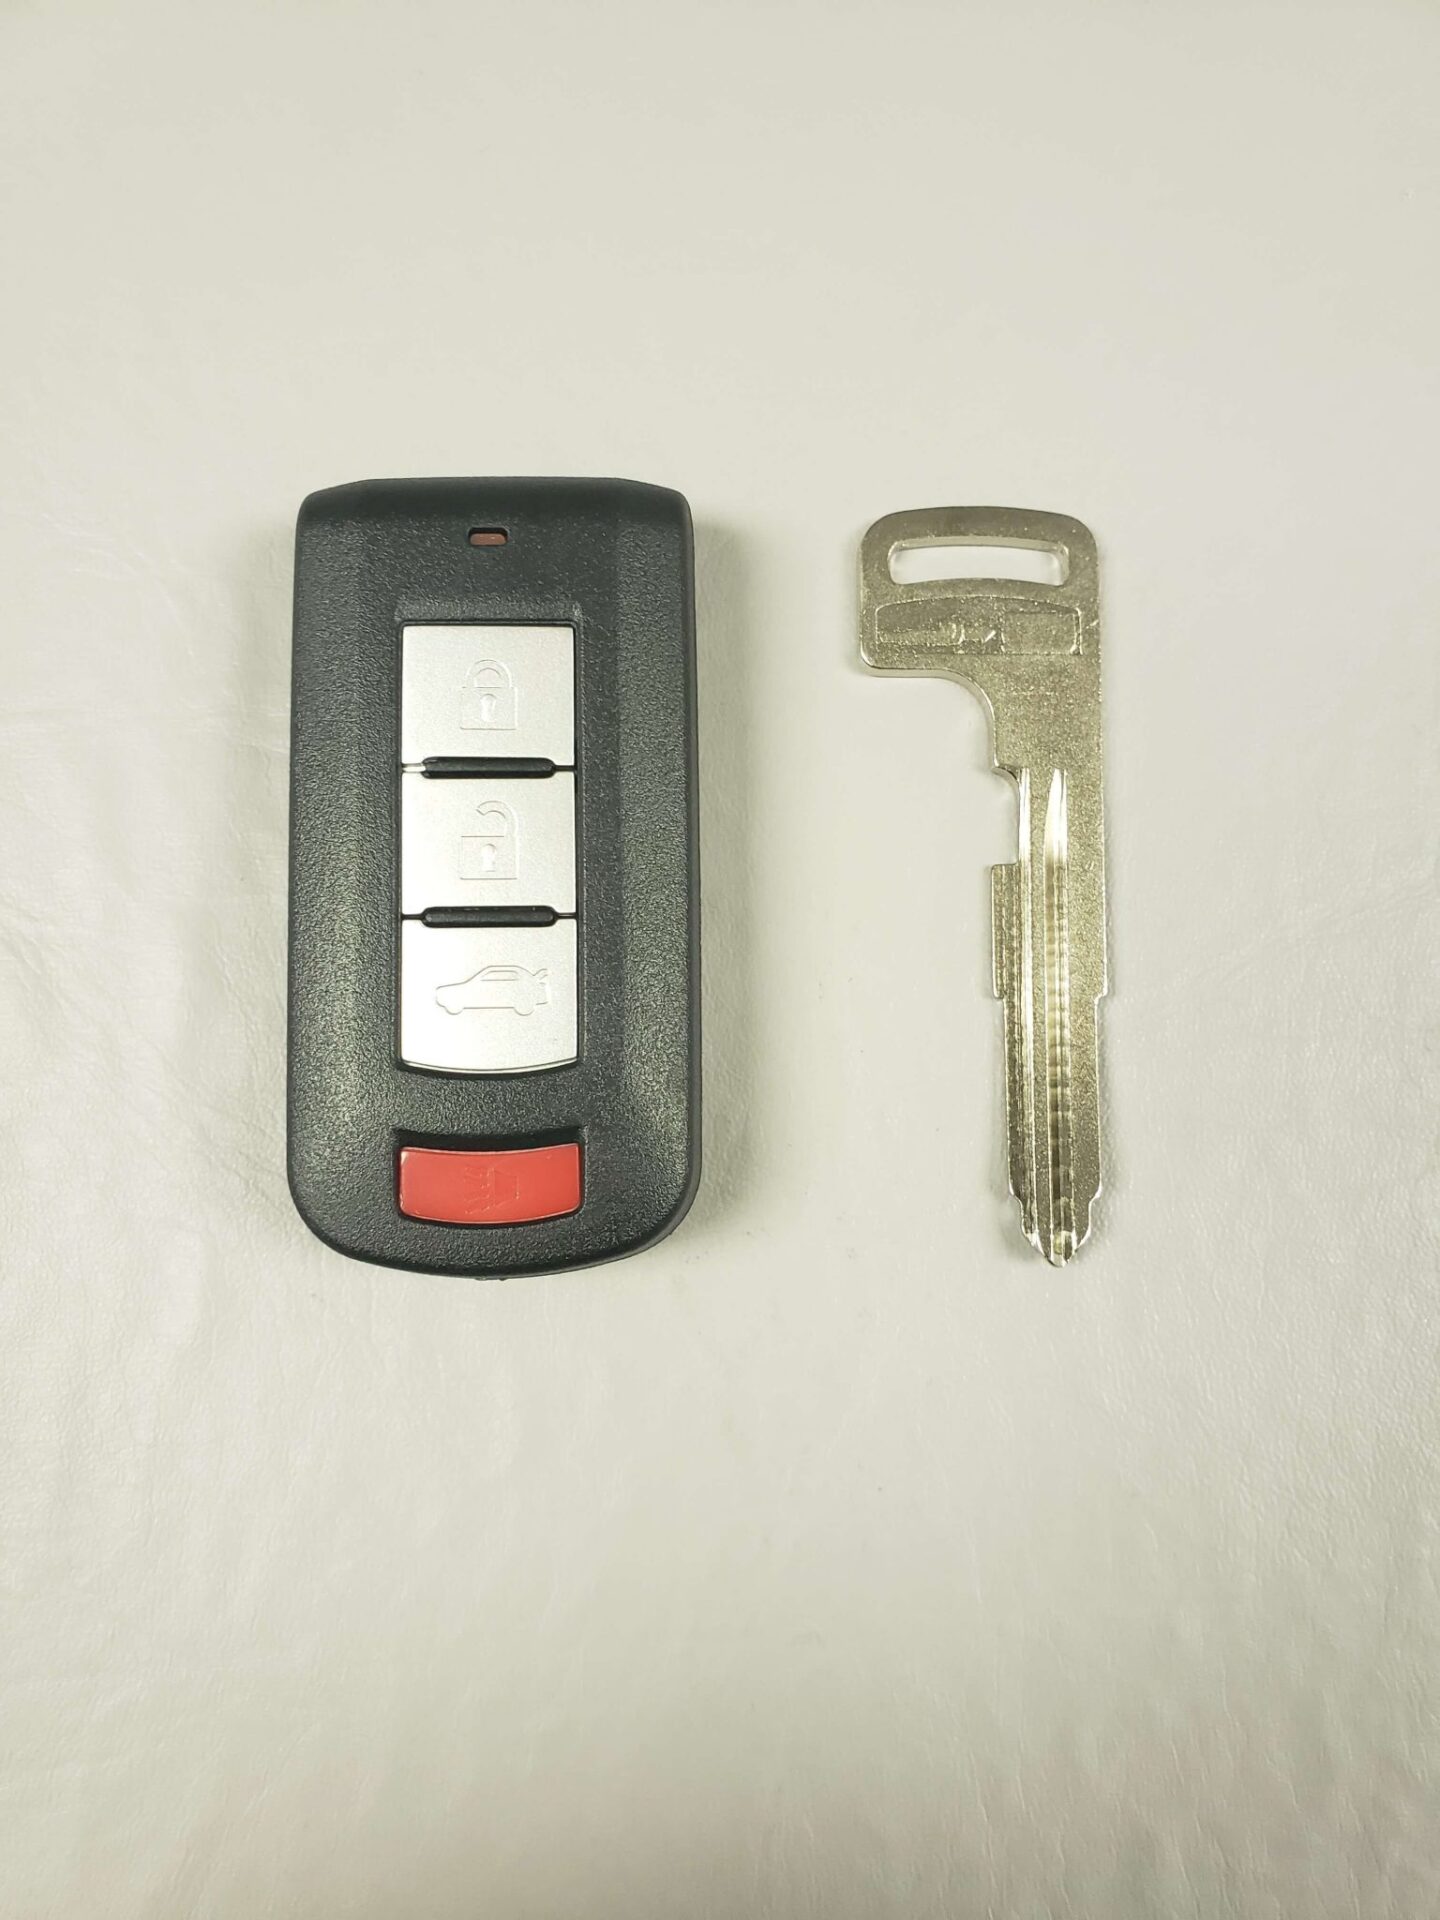 Mitsubishi Outlander Key Replacement What To Do, Costs